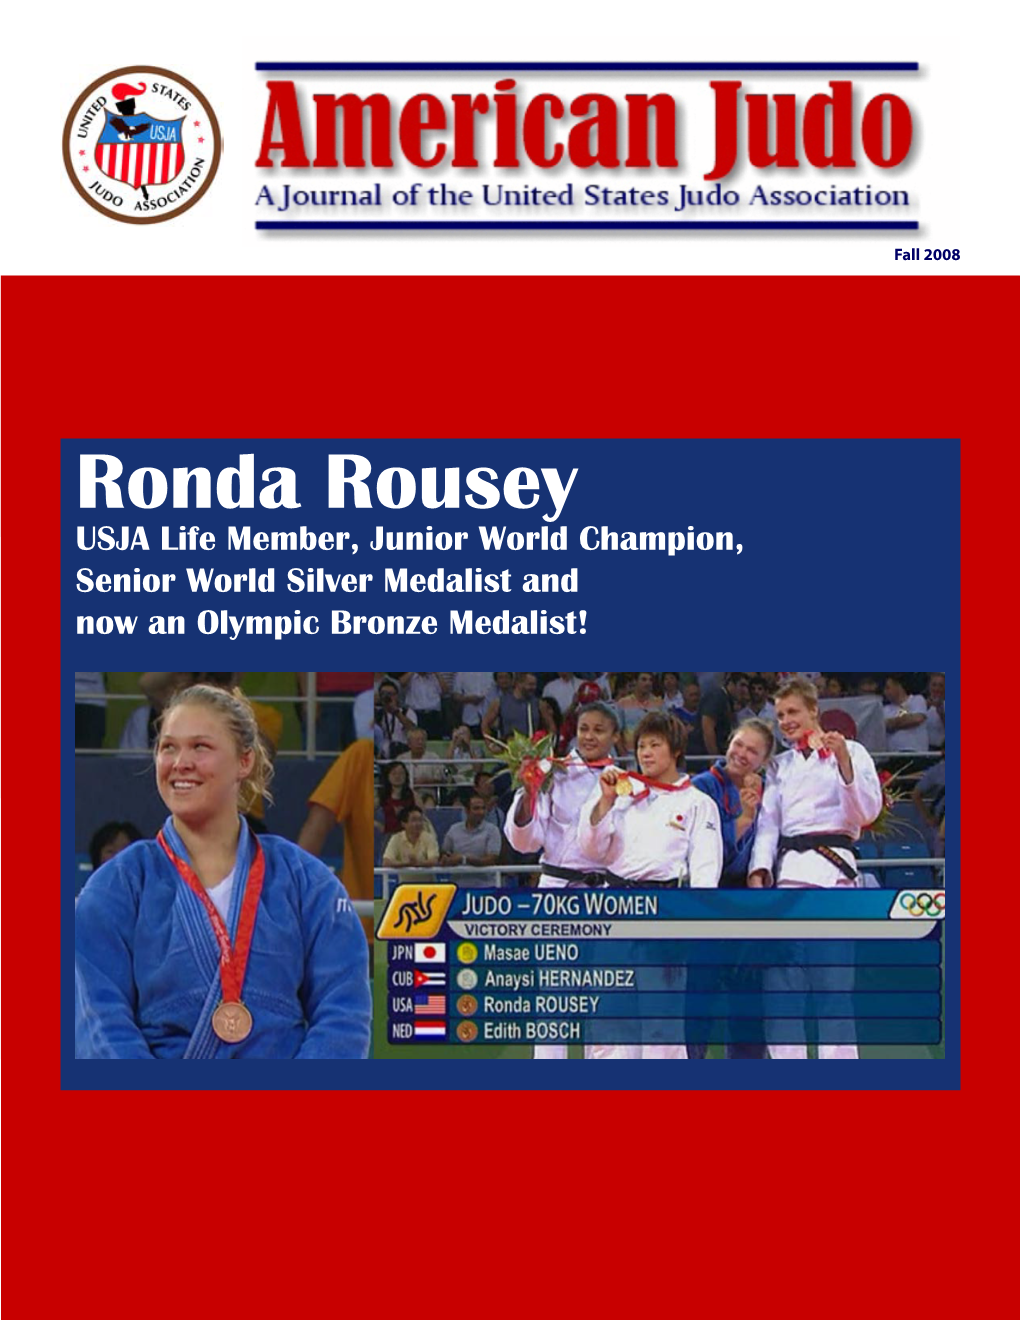 Ronda Rousey USJA Life Member, Junior World Champion, Senior World Silver Medalist and Now an Olympic Bronze Medalist!